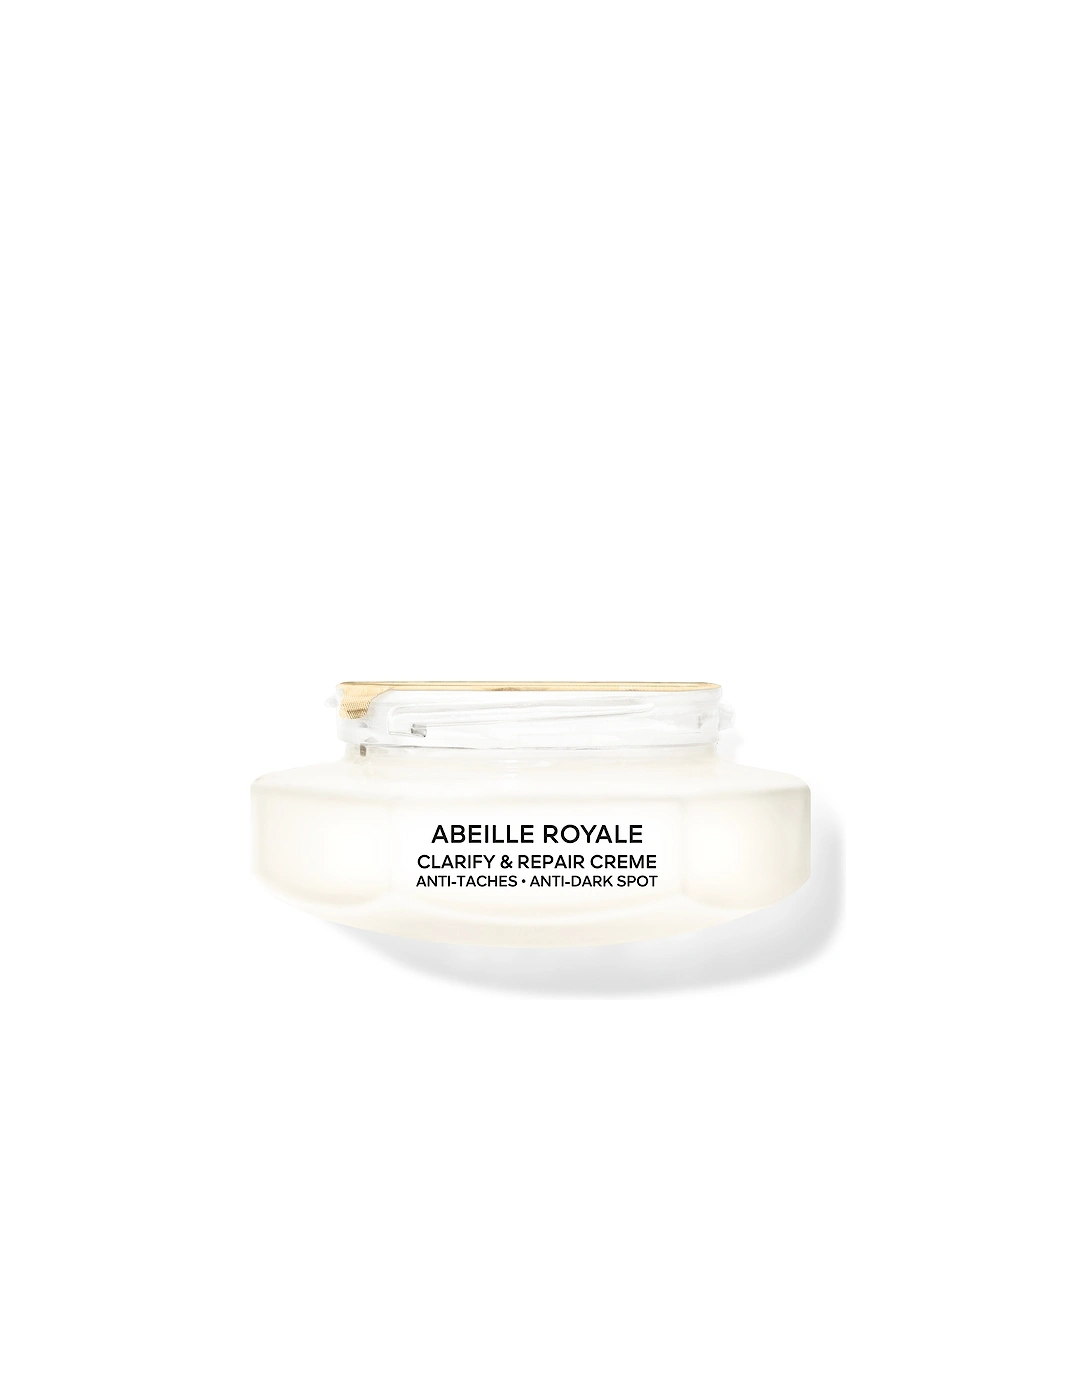 Abeille Royale Clarify and Repair Crème - The Refill 50ml, 2 of 1